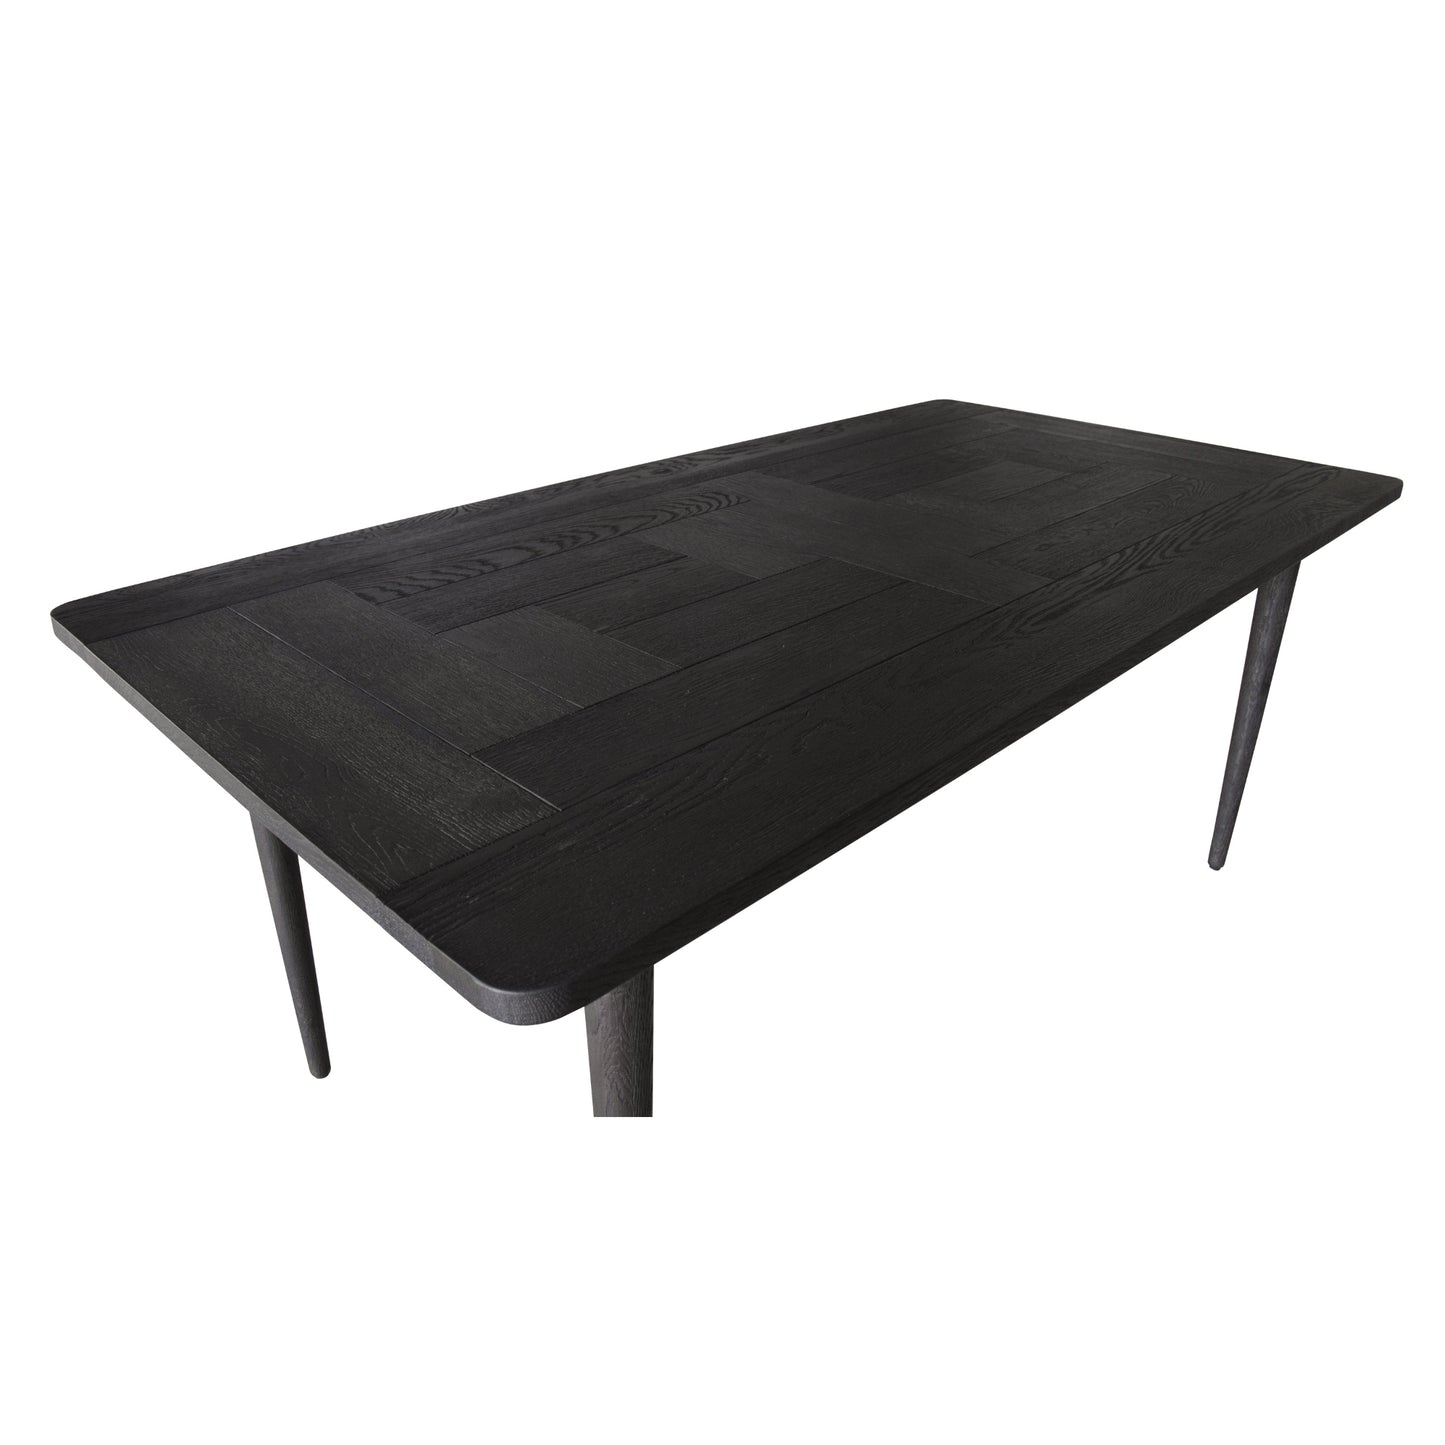 Claire Dining Table 180cm Solid Oak Wood  - Black